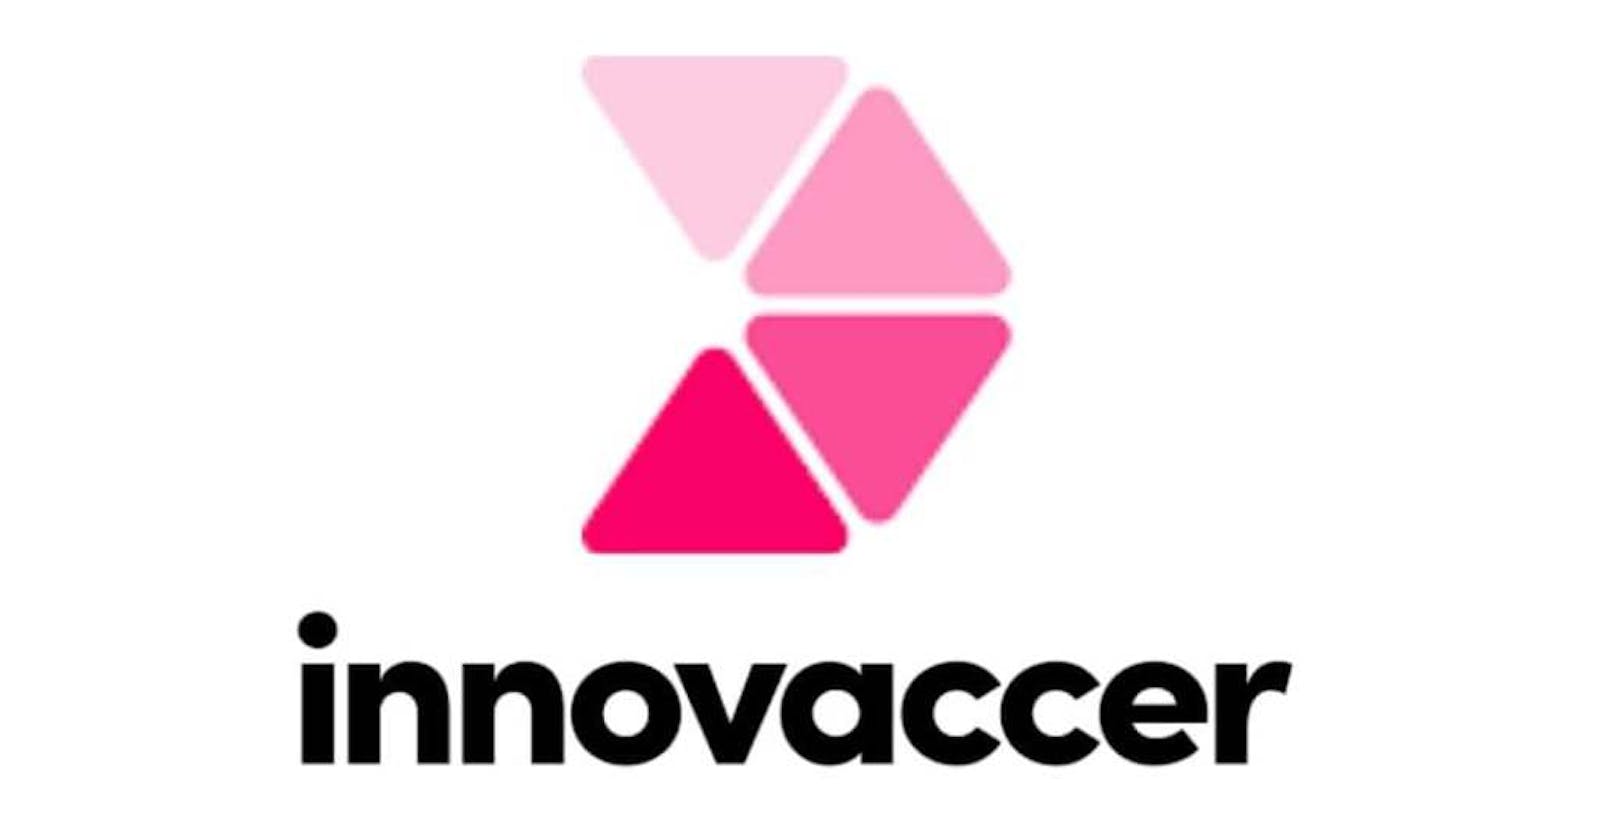 6 month Internship experience at InnovAccer 🦄